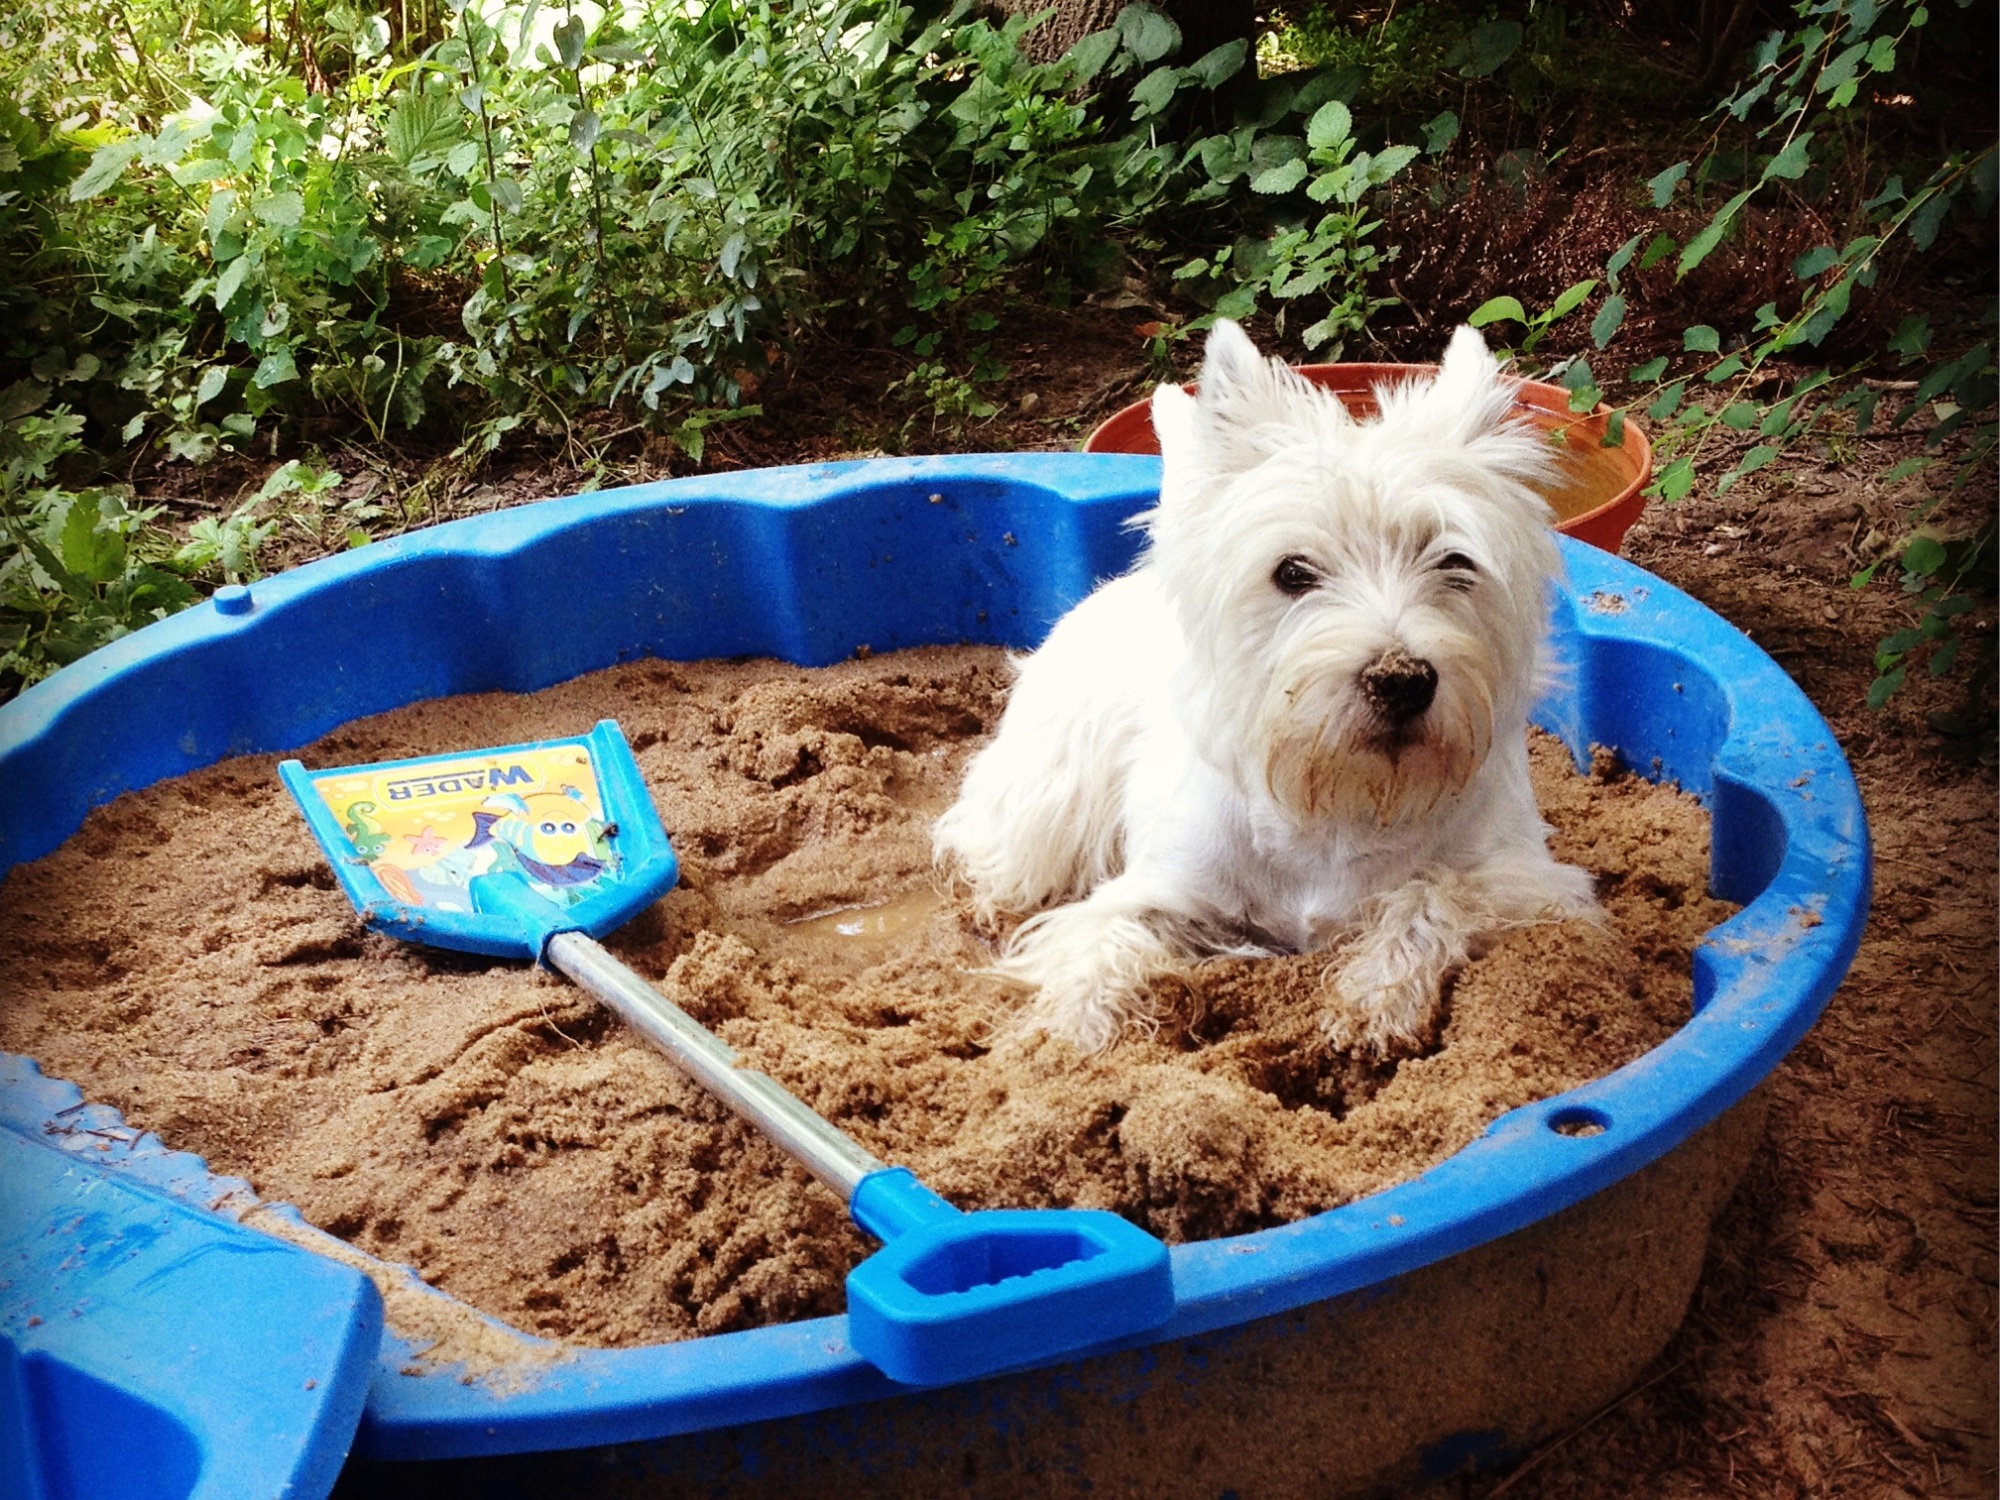 West highland white terrier. Podstawowe informacje – Pan ...